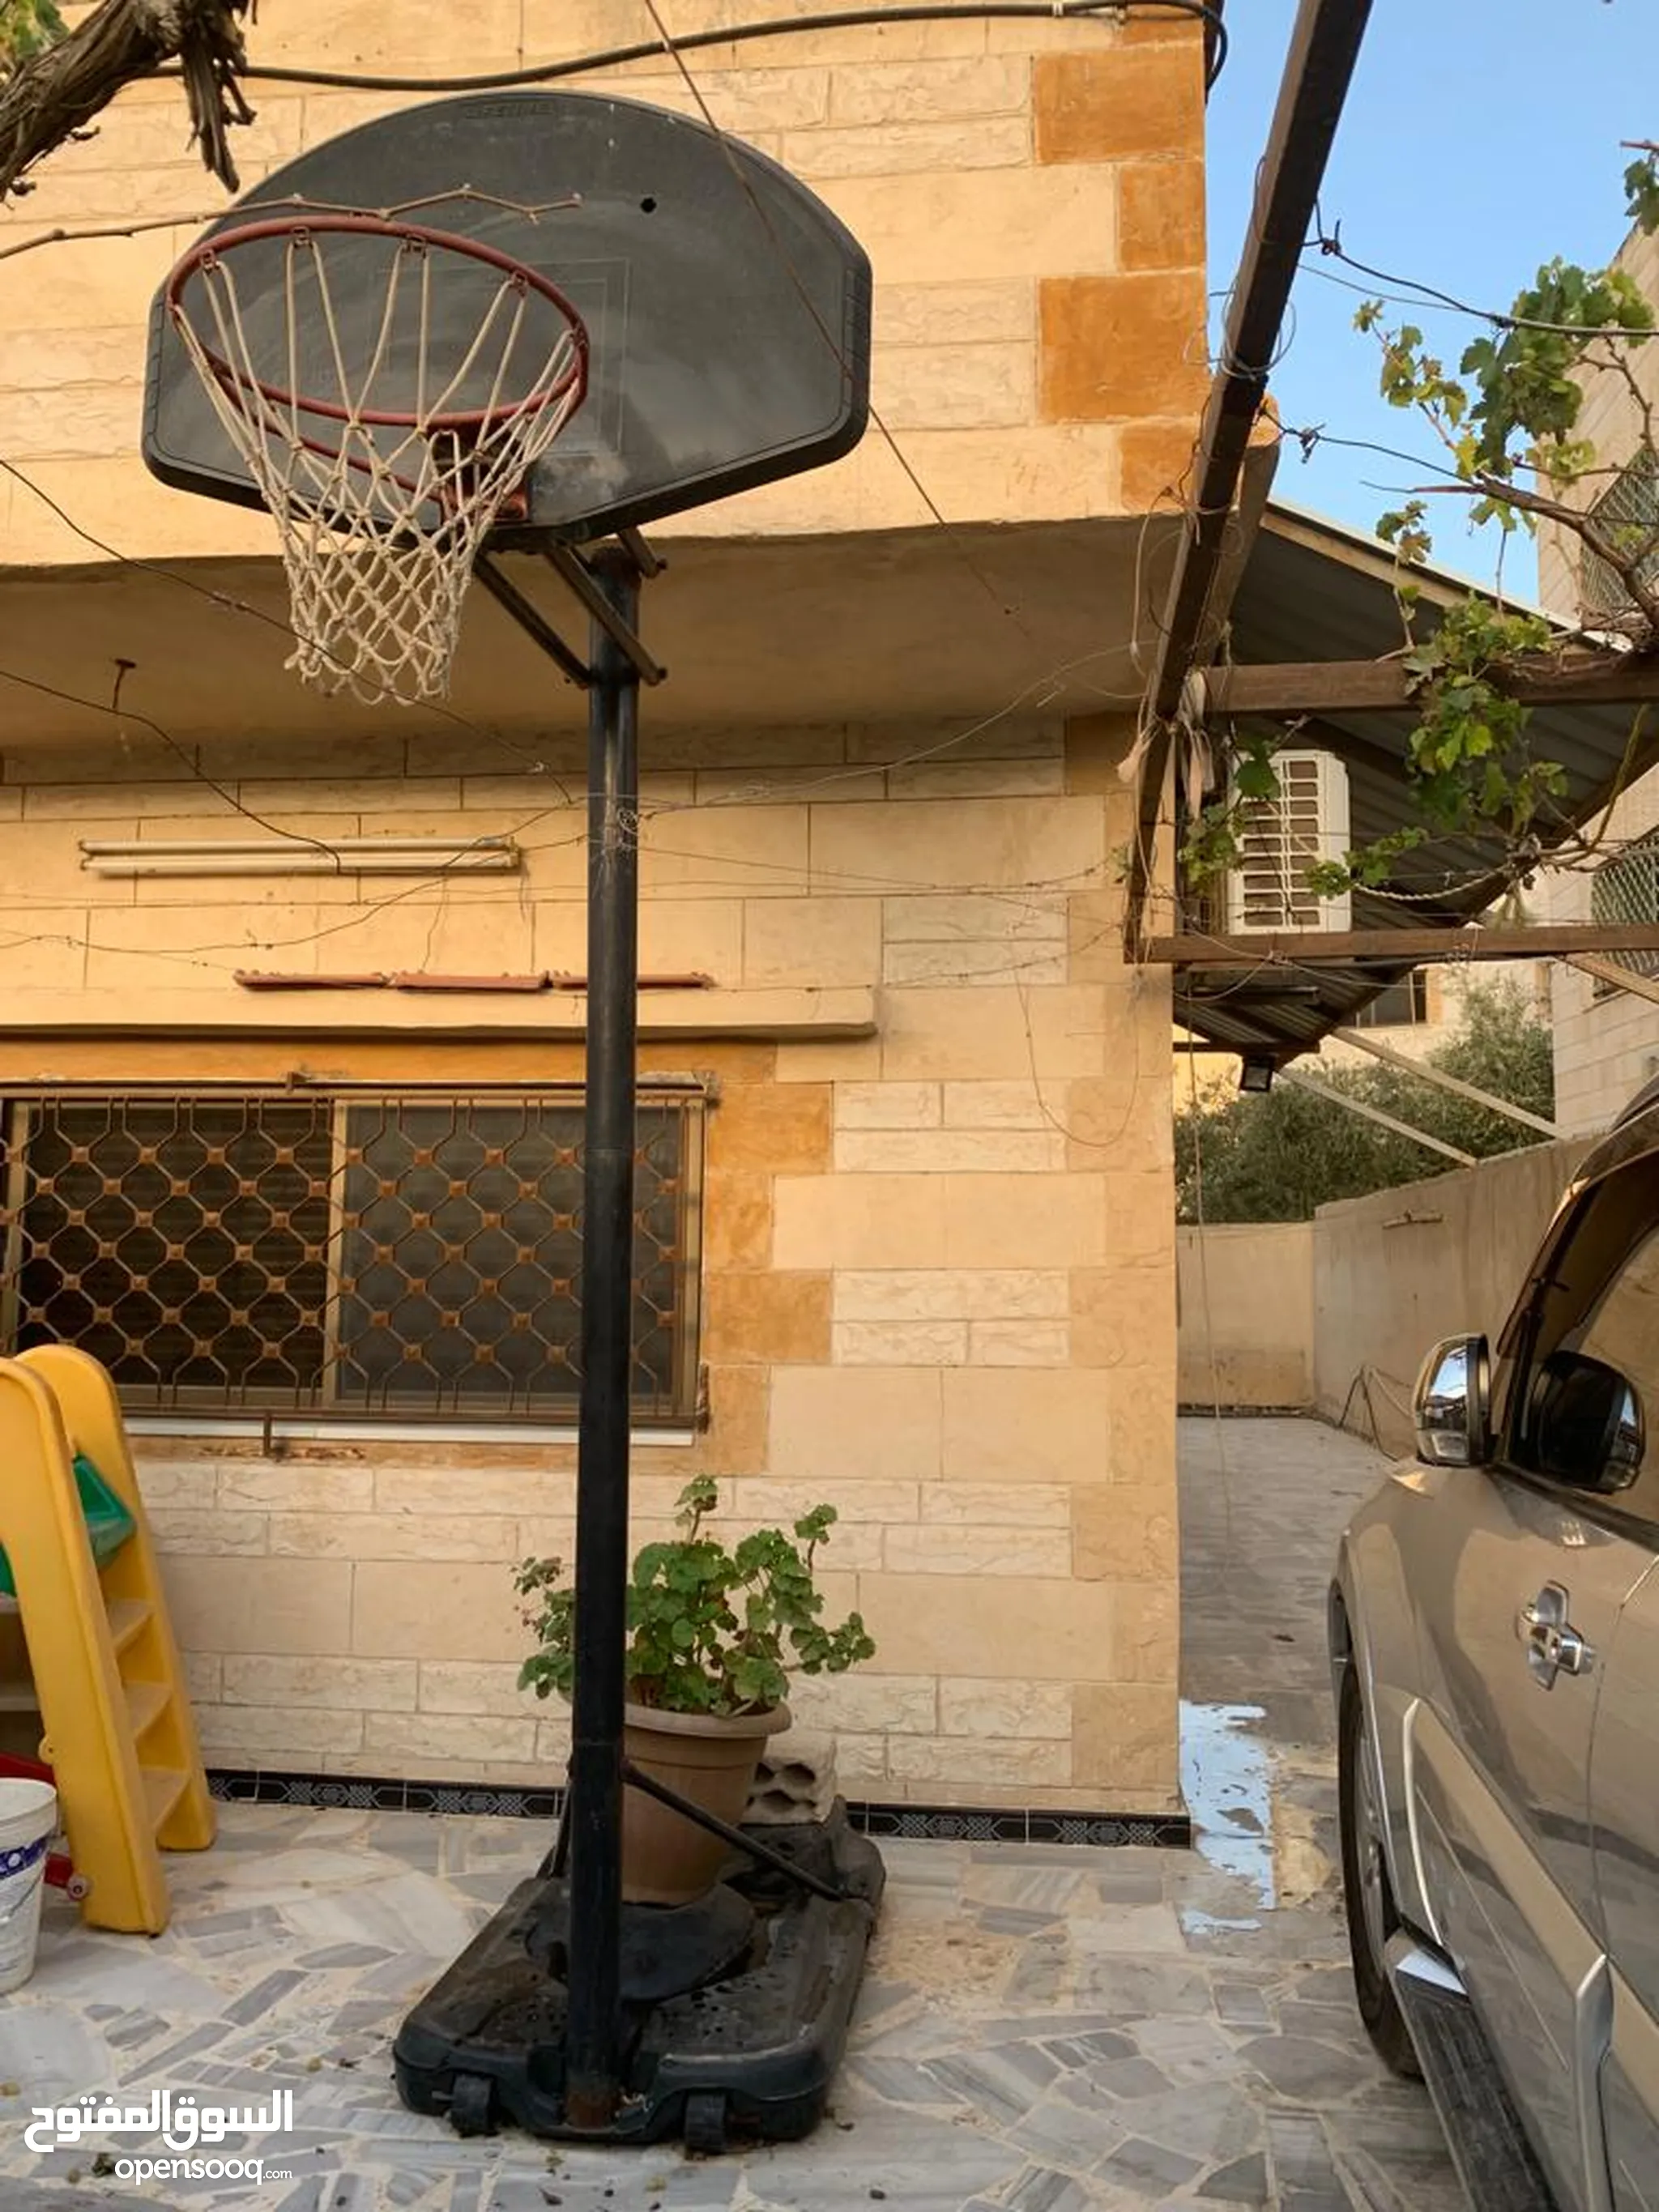 Affordable Ball Sports Equipment for Sale or Rent in Zarqa - Play Your  Favorite Sports! | OpenSooq